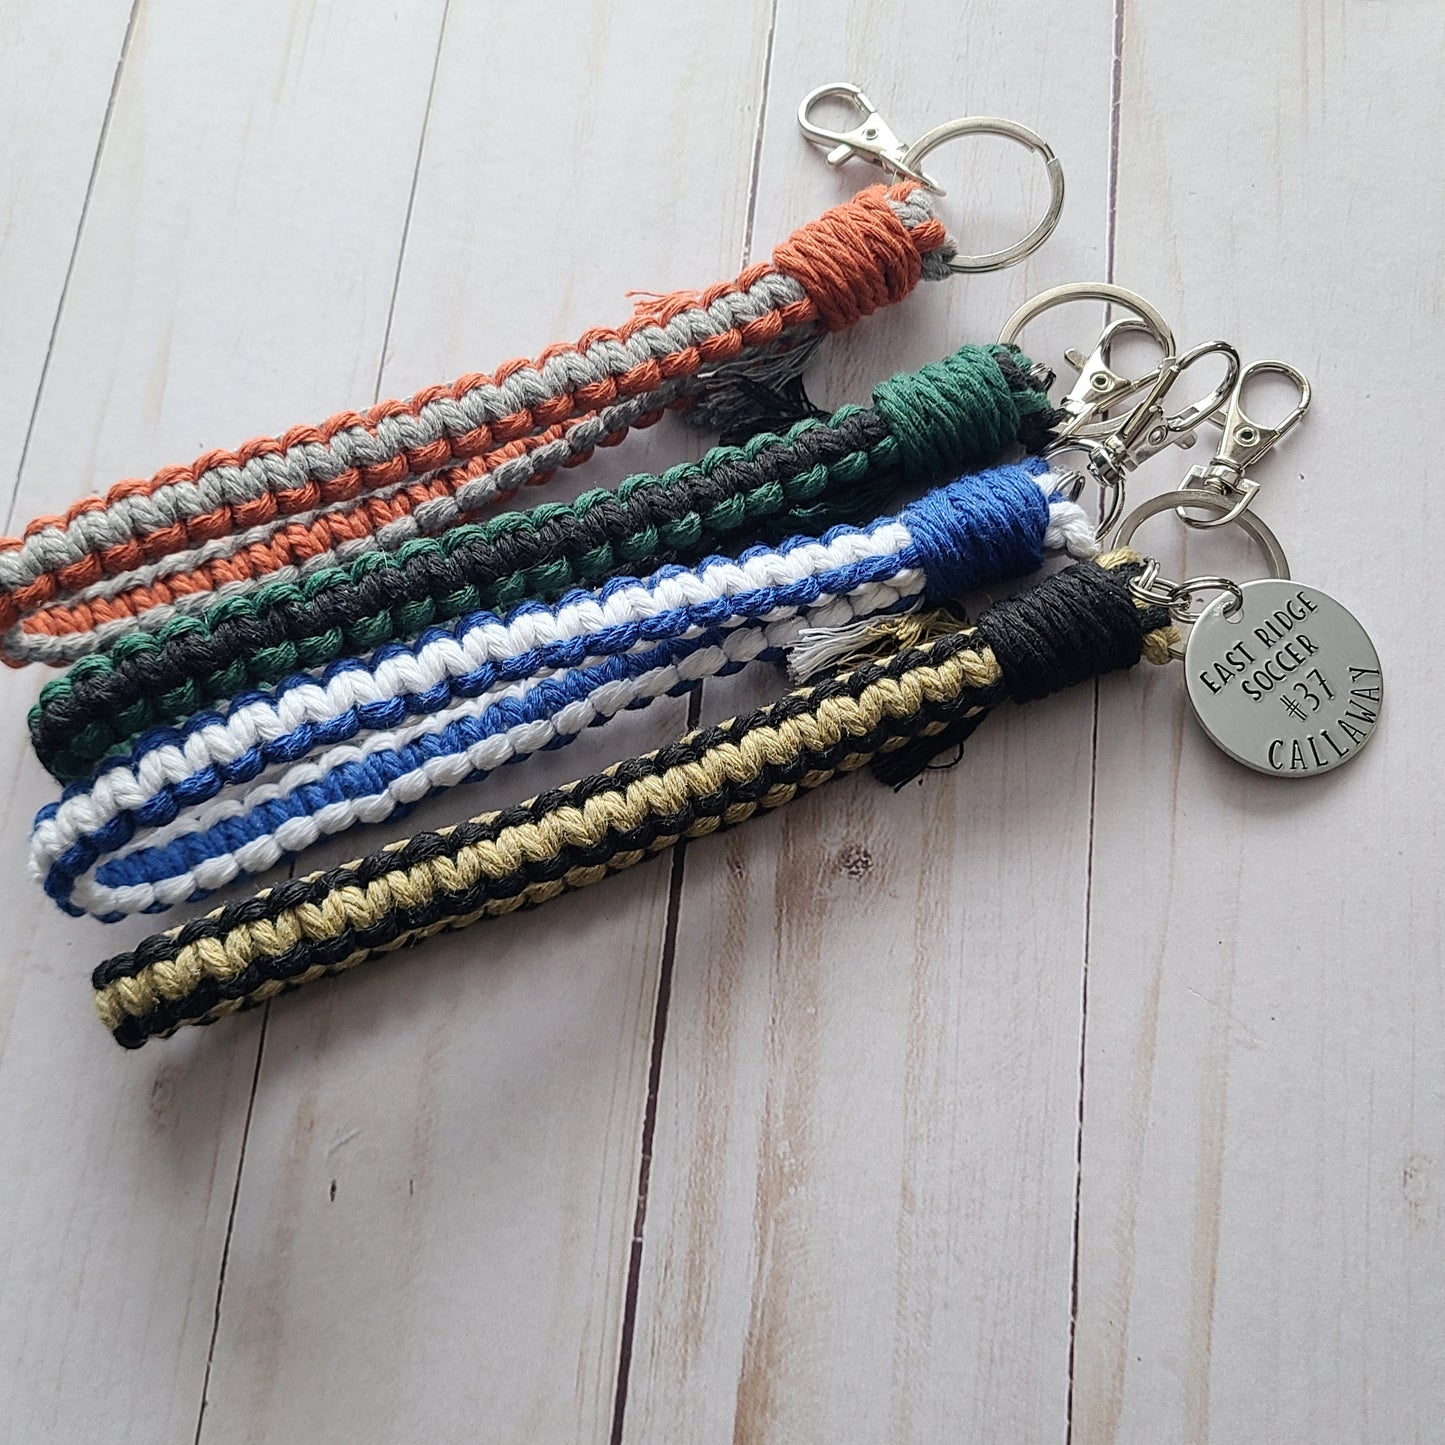 Your Team and Player Custom Tag with Flat Macrame Wristlet, School Colors Wristlet, Team Spirit Custom Keychains, Hand Stamped Metal Sport Keychain